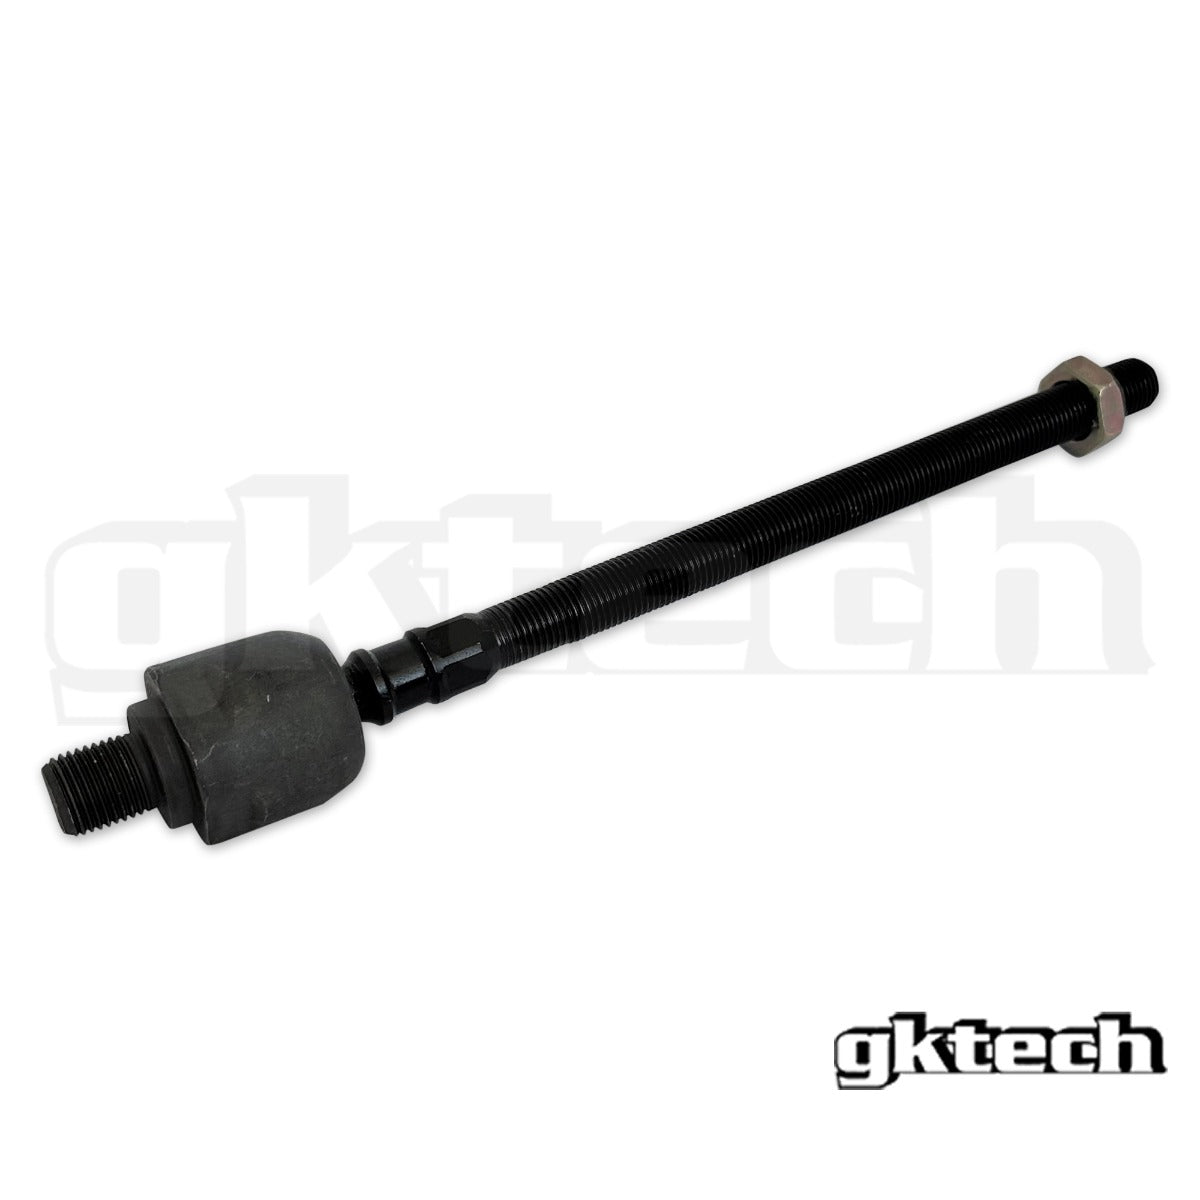 86 / GR86 / BRZ Super Lock replacement inner tie rod - SOLD INDIVIDUALLY